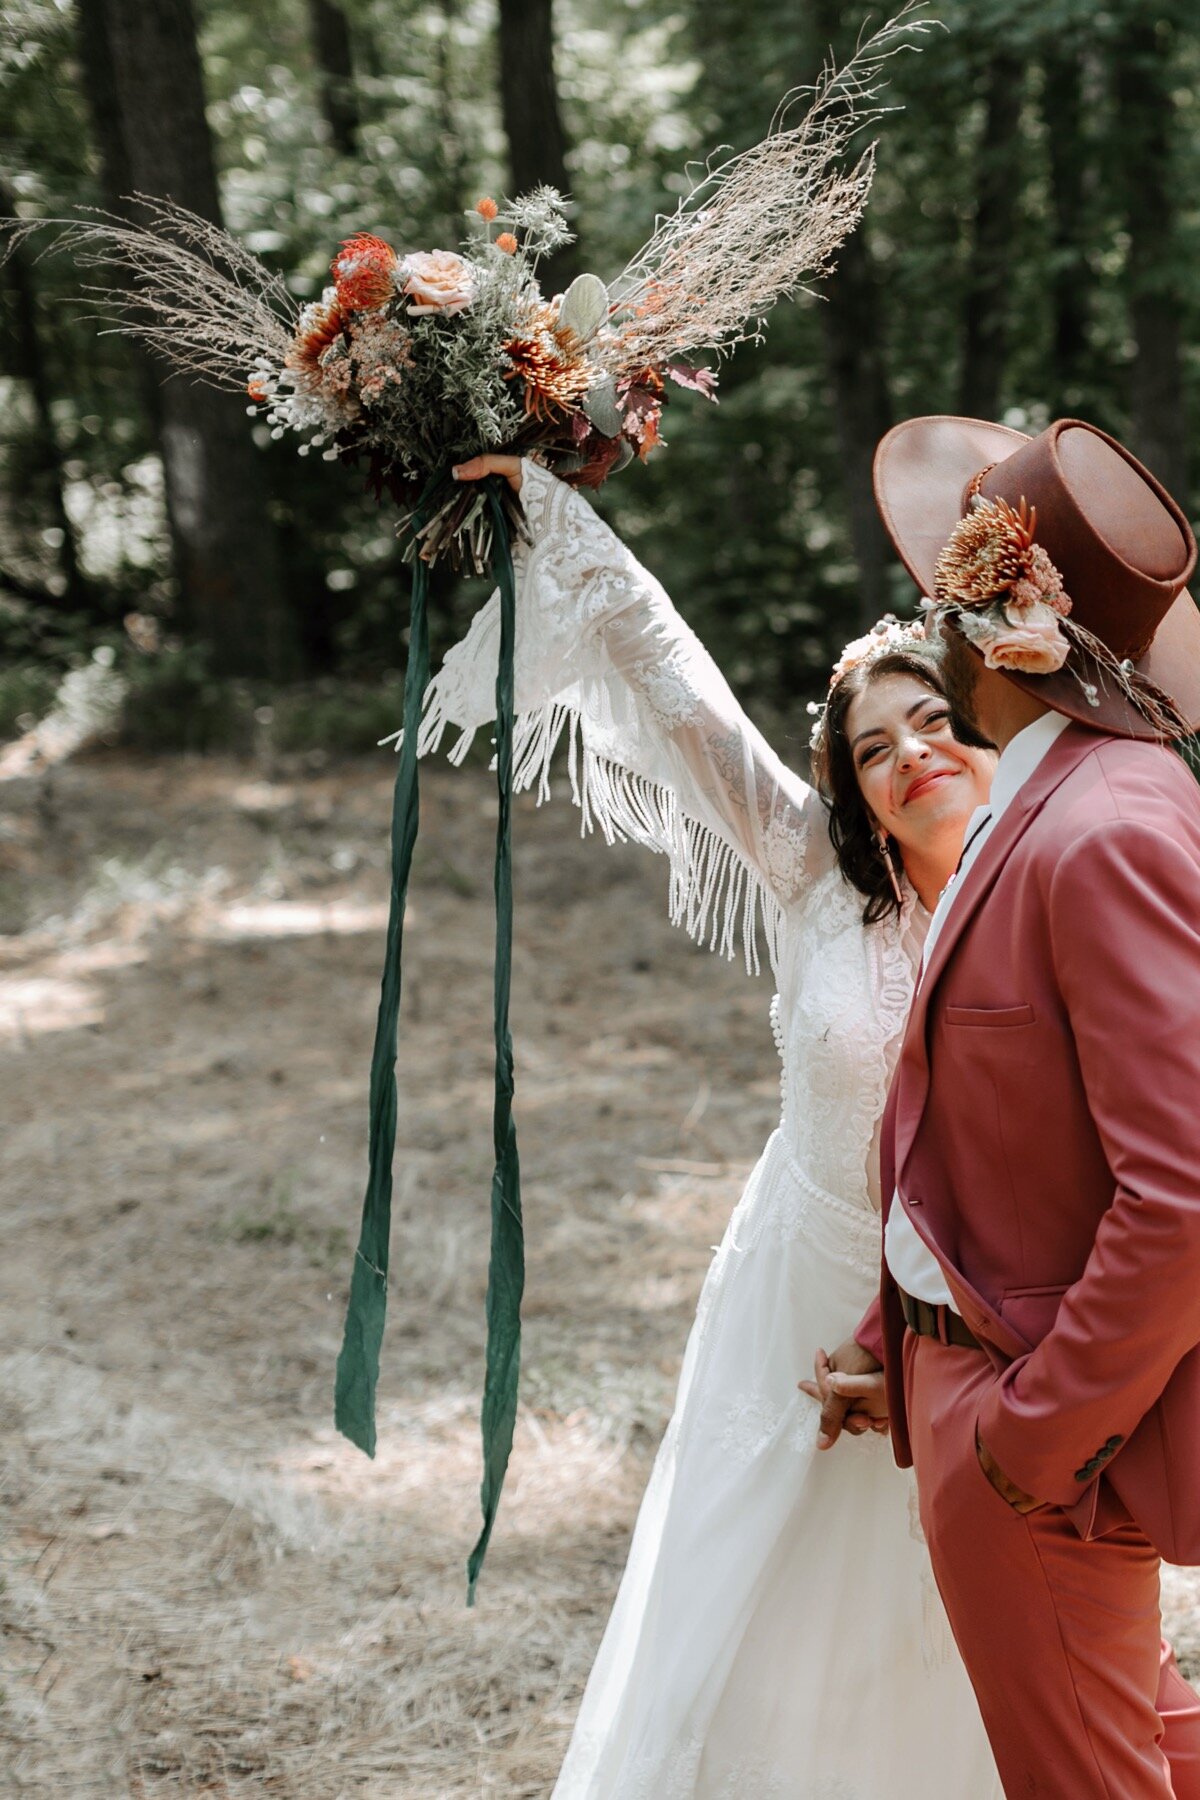 09_how-we-gather-107_tassels_colorful_suit_bradford_shoot_Chips_inspired_salsa_color_hat_Styled_hispanic_flowers_gatheringco_summer_cmp_groom.jpg